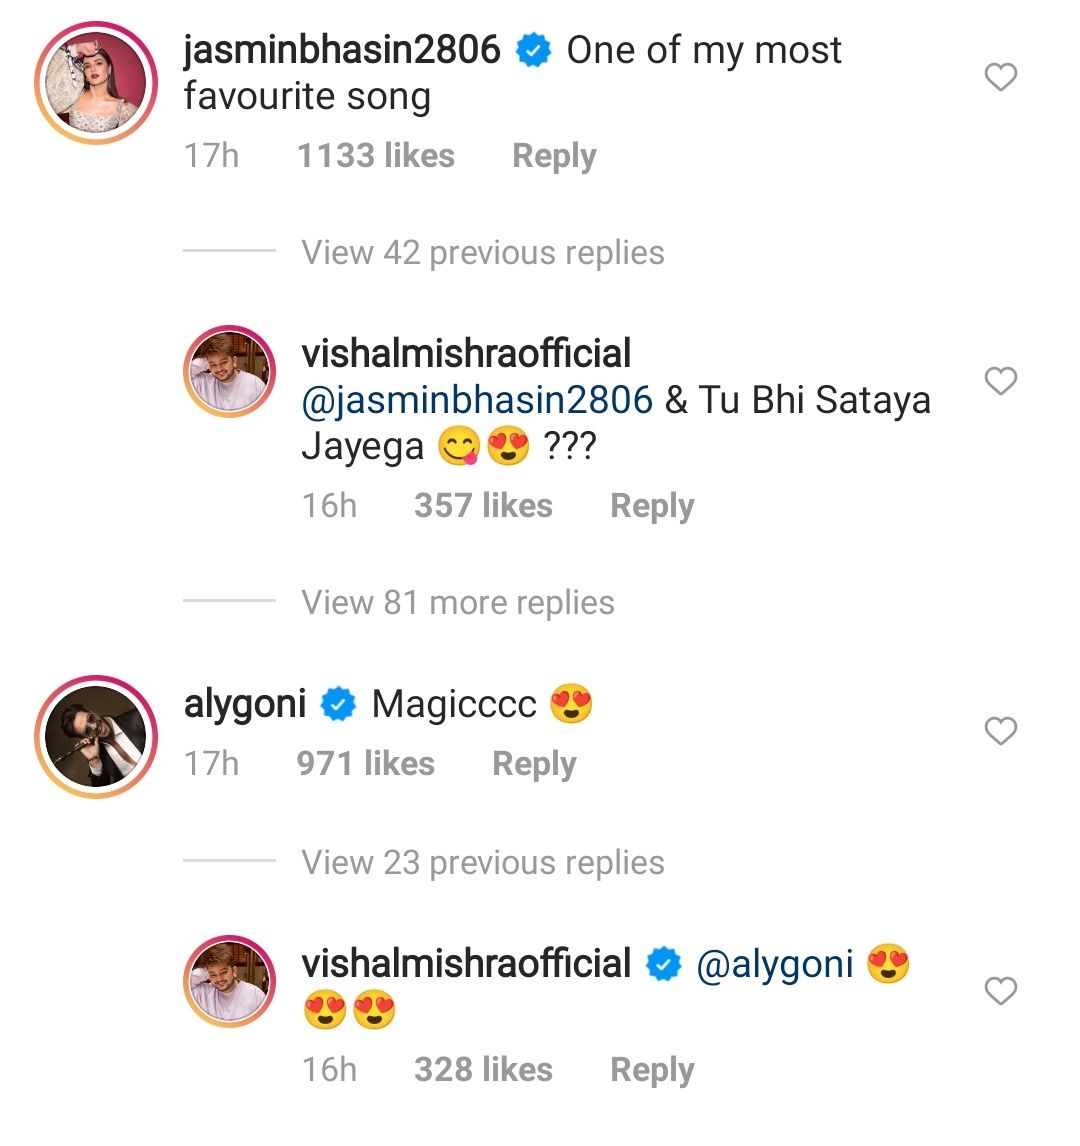 Jasmin Bhasin And Aly Goni's Comment